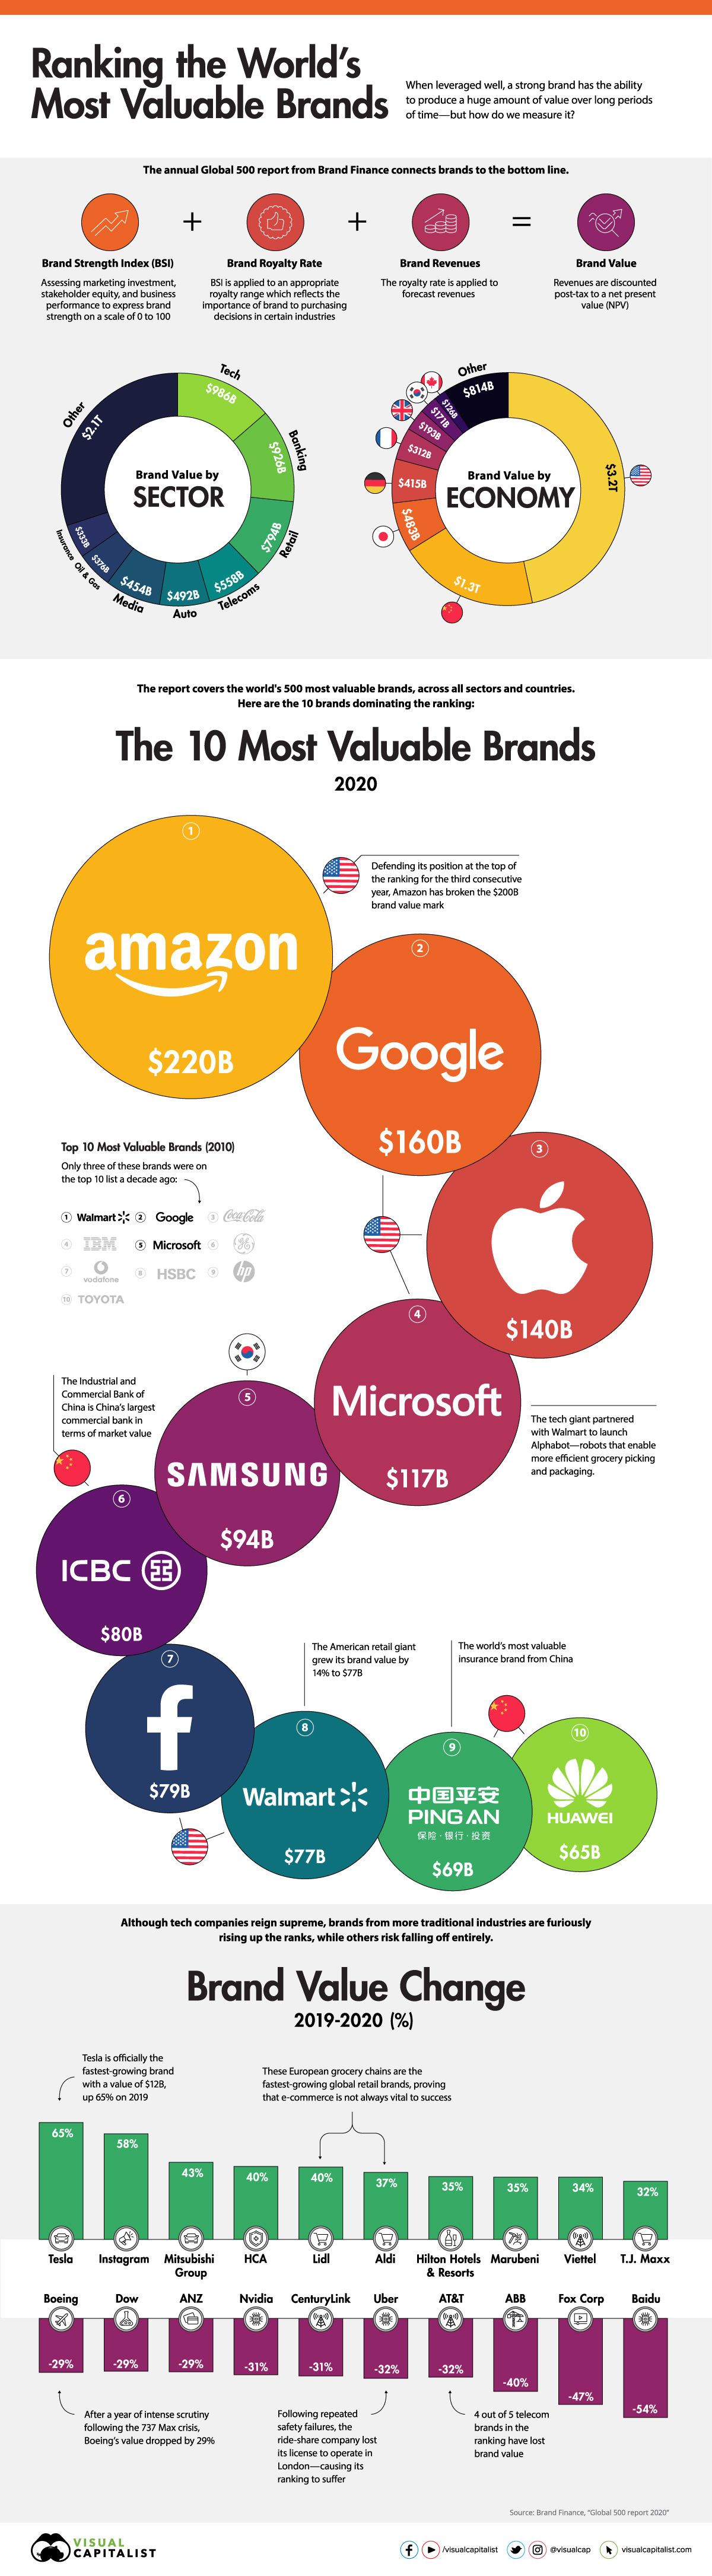 Ranked The Most Valuable Brands in the World in 2020